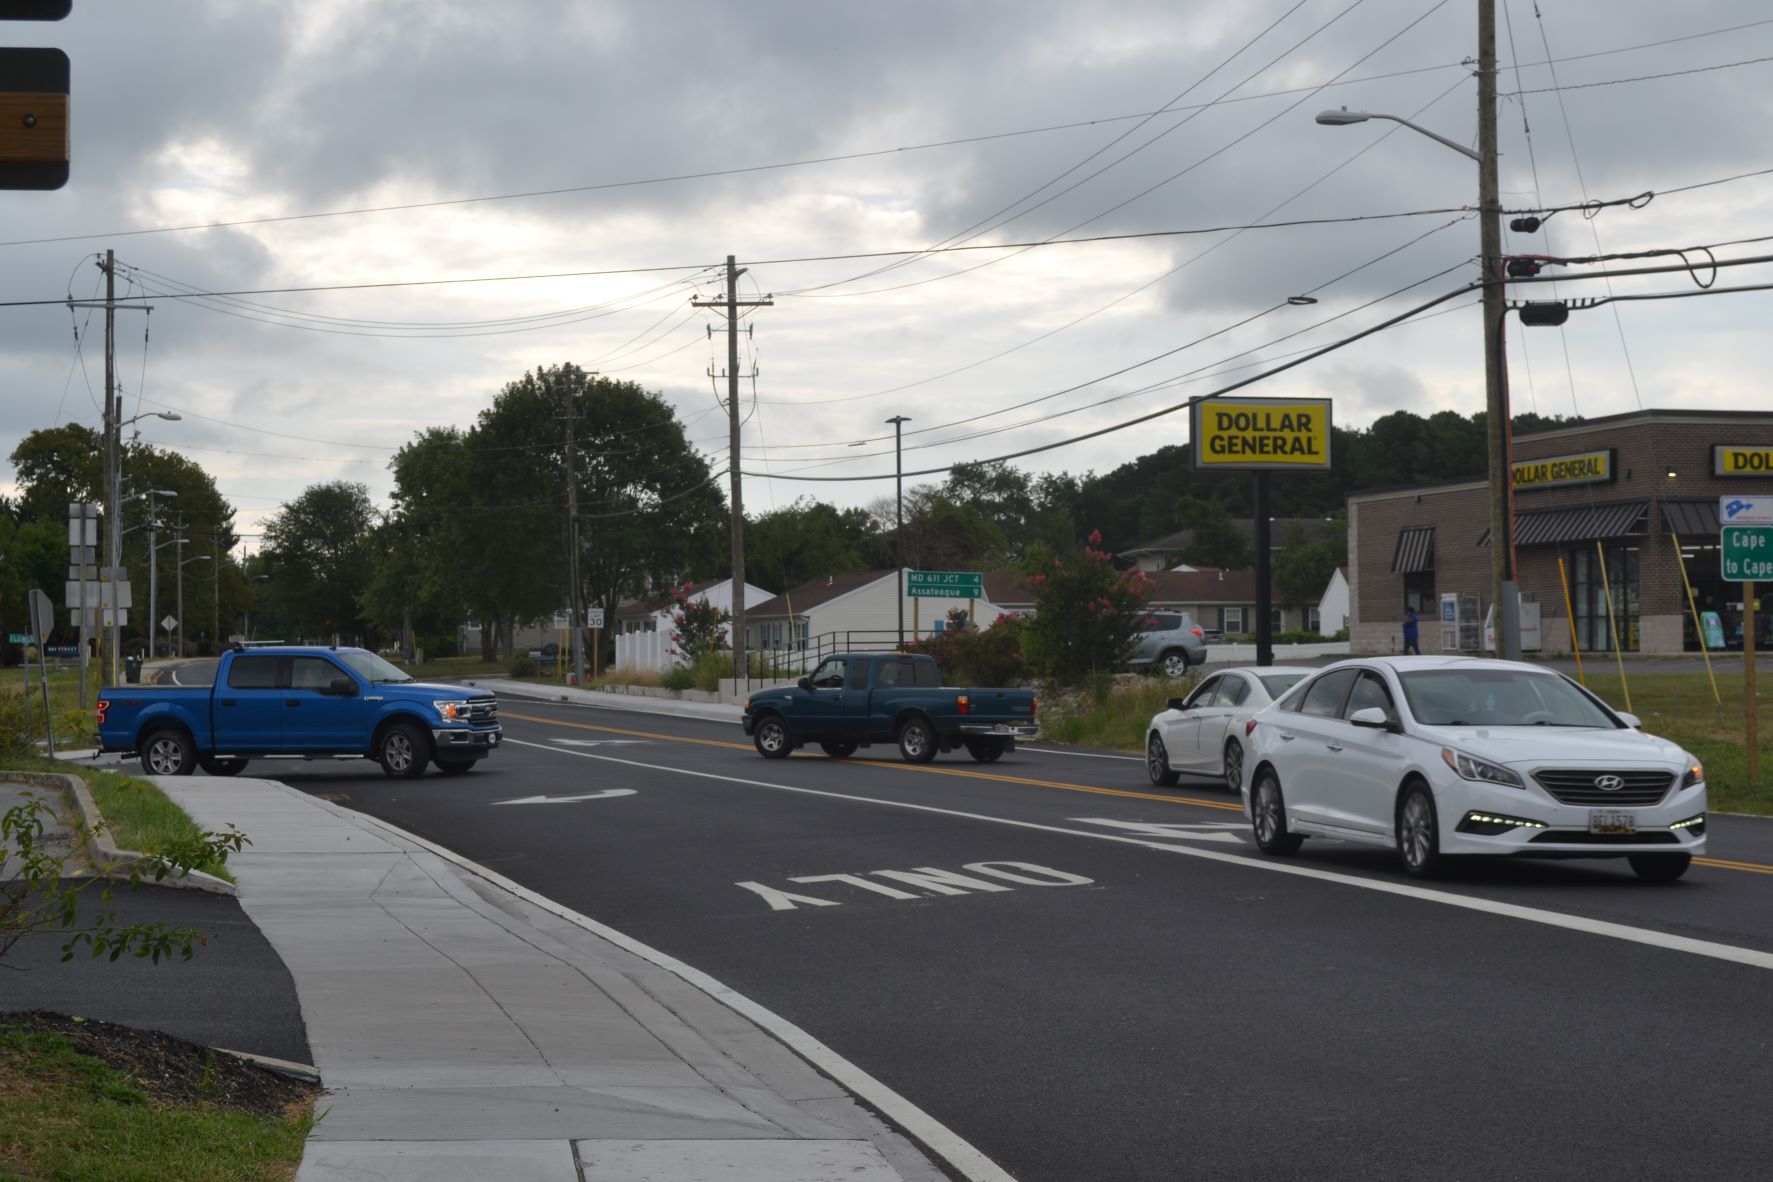 Berlin Officials Discuss Safety Concerns Near Intersection